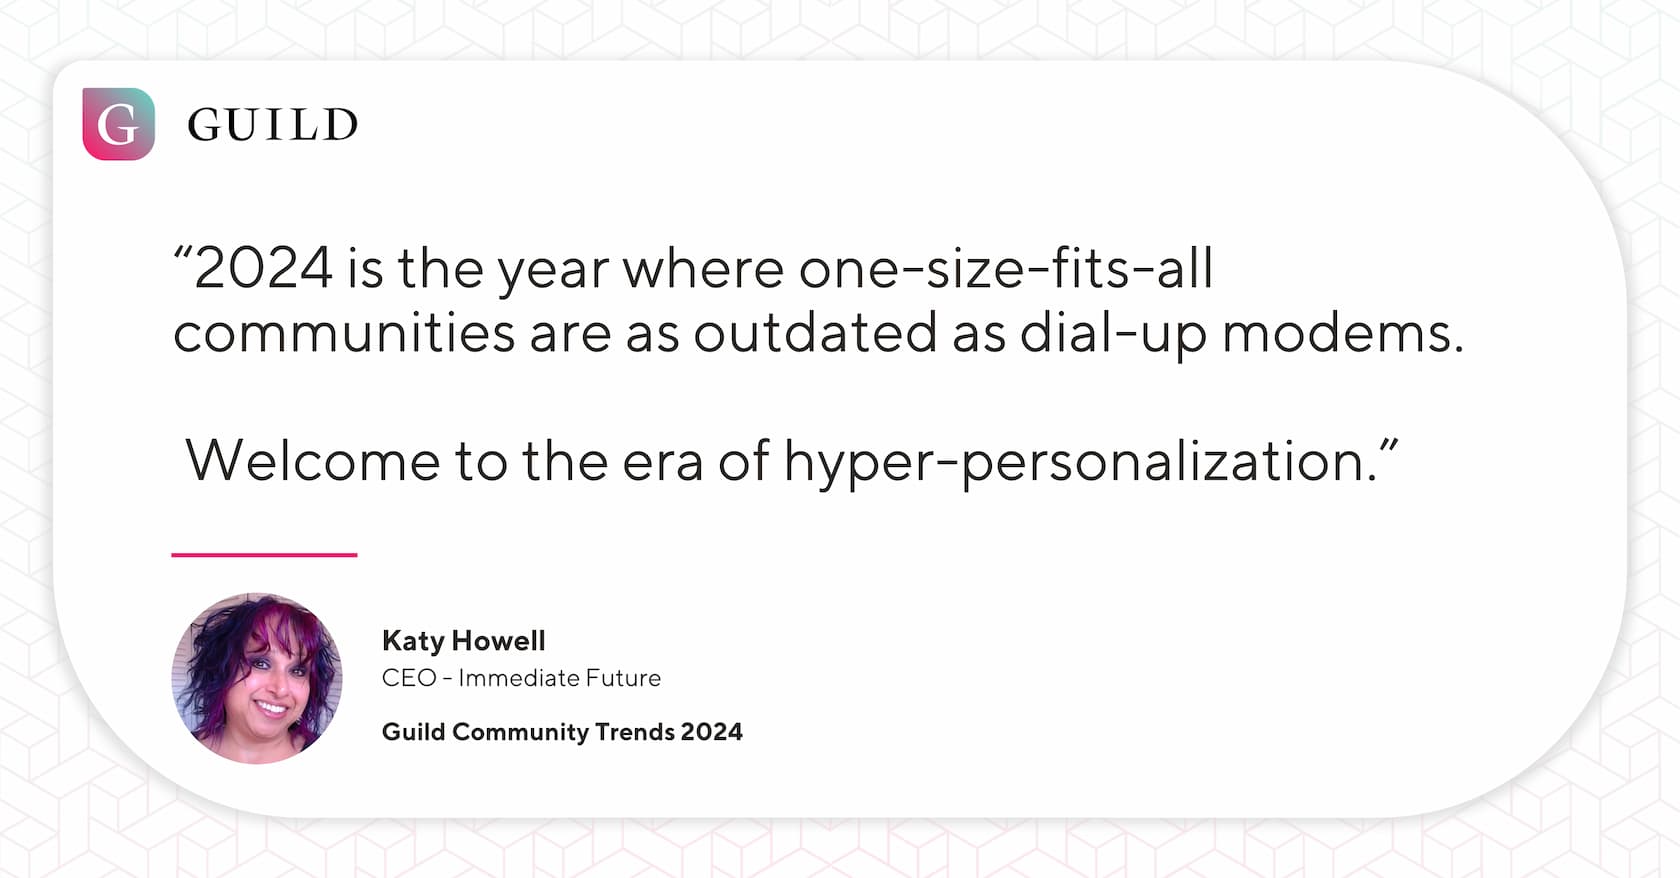 A quote from Katy Howell reading "2024 is the year where one-size-fits-all communities are as outdated as dial-up modems. Welcome to the era of hyper-personalization."